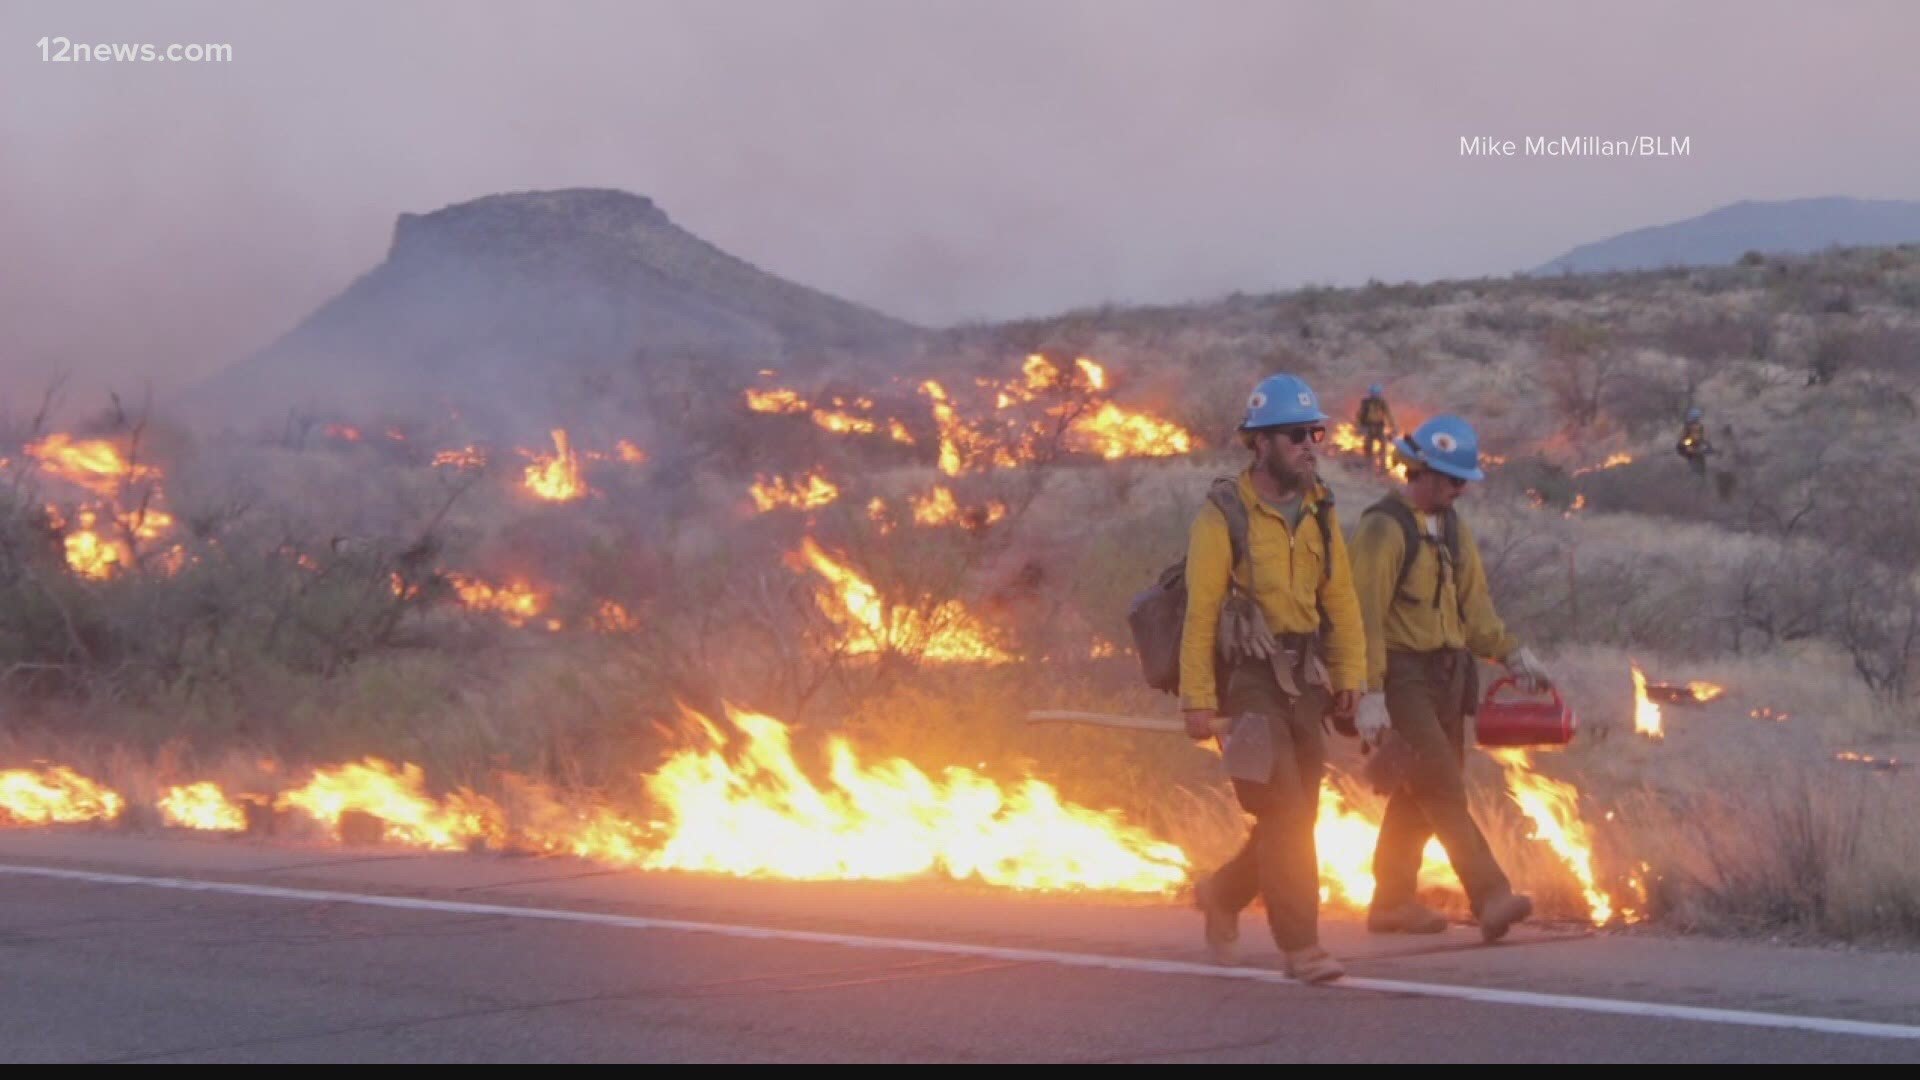 Firefighter leaders are expressing concerns after crews encounter challenges as they battle wildfires. Jen Wahl has more.